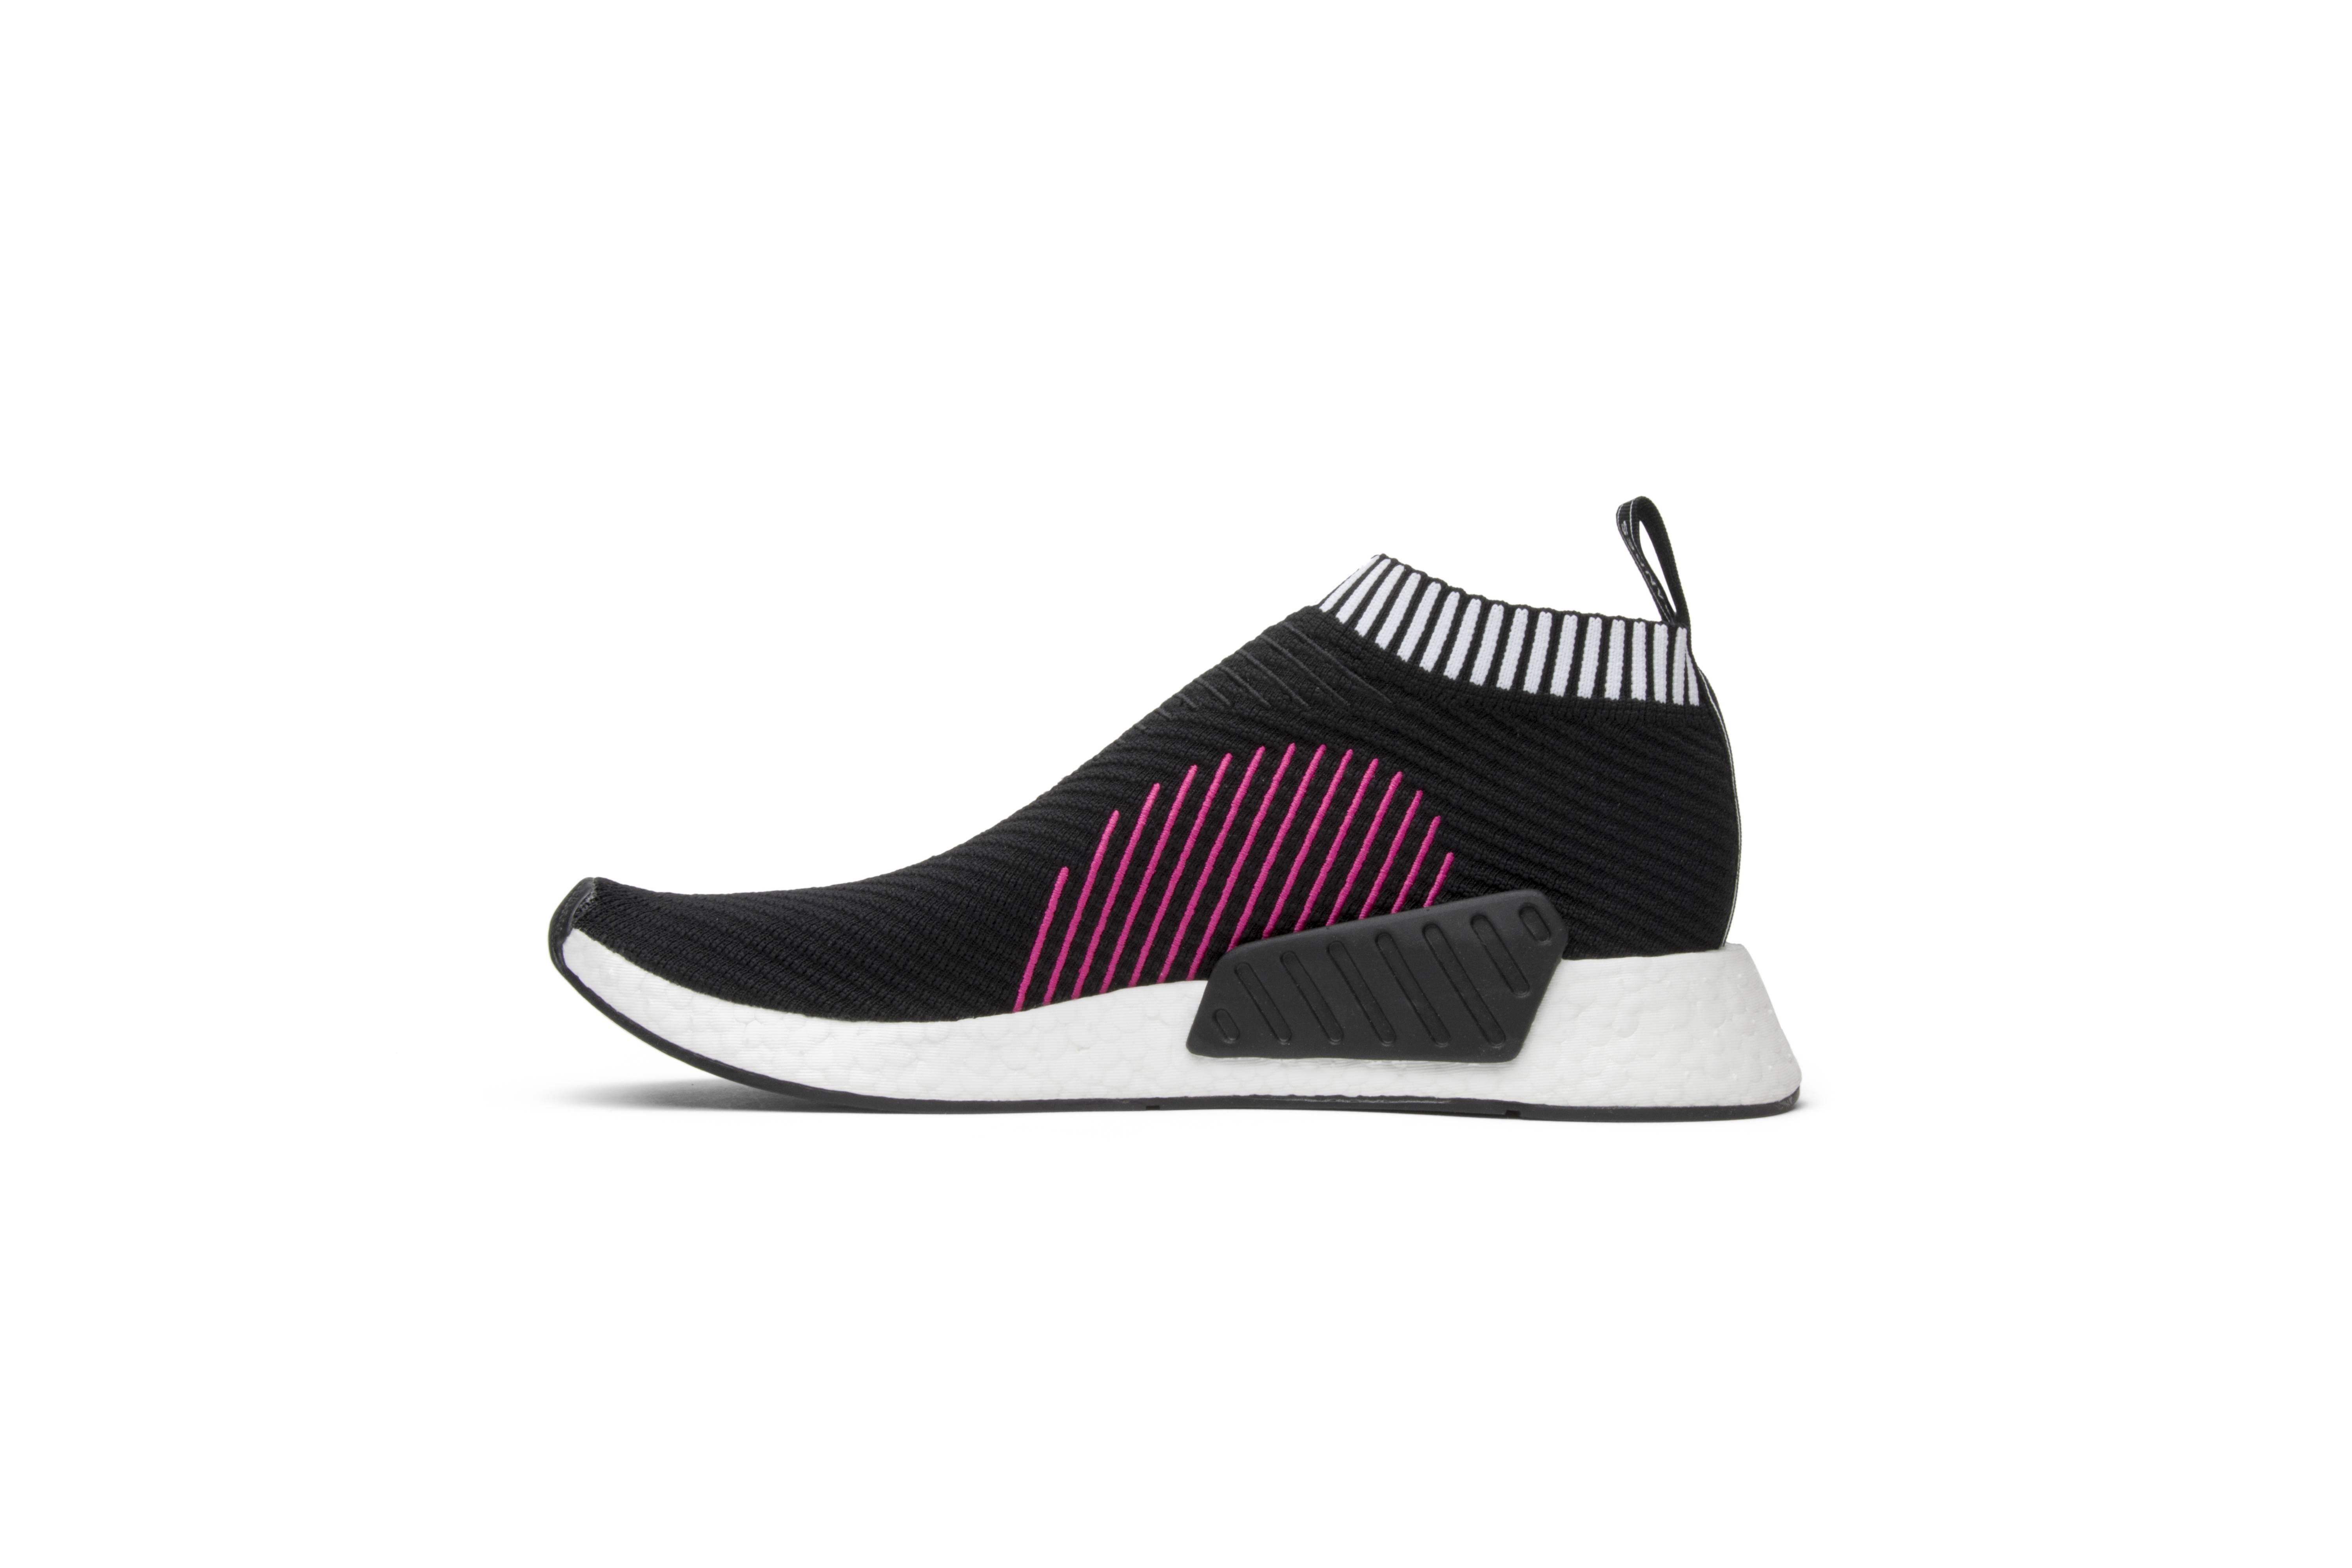 adidas Nmd Cs2 Core Black Shock Pink for Men - Save 37% - Lyst